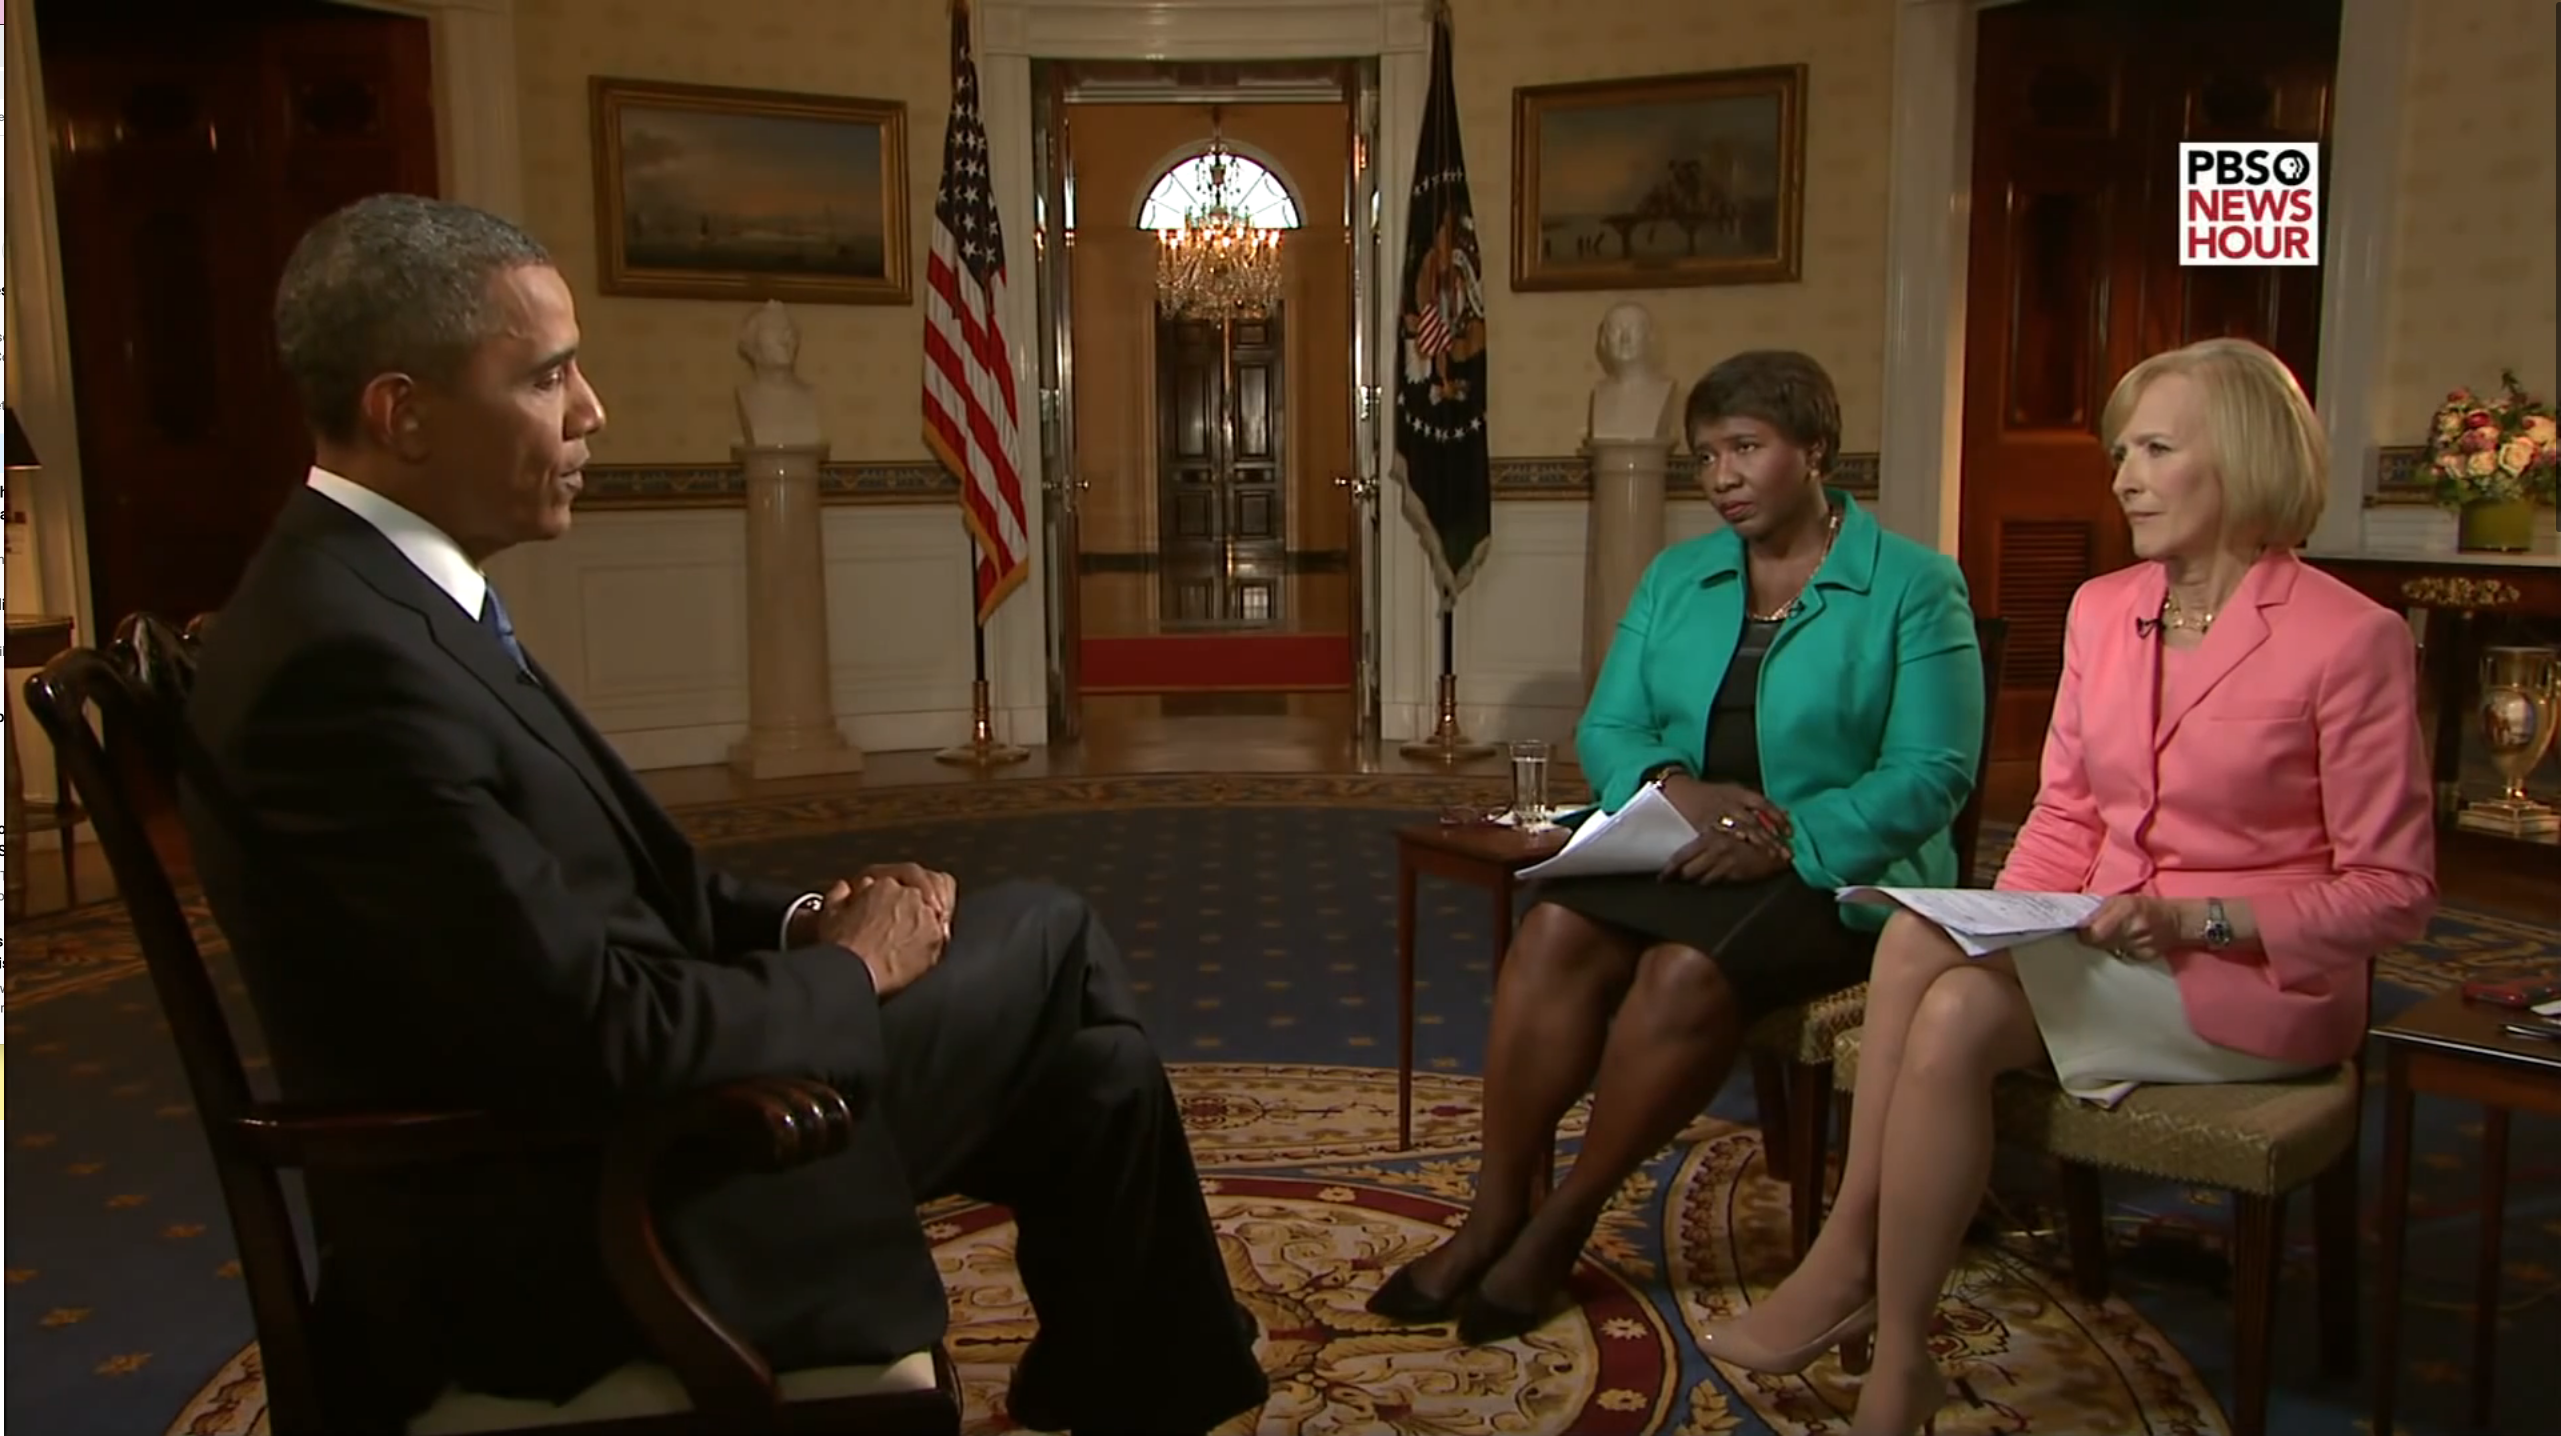 Journalists Gwen Ifill and Judy Woodruff interview President Obama for PBS Newshour